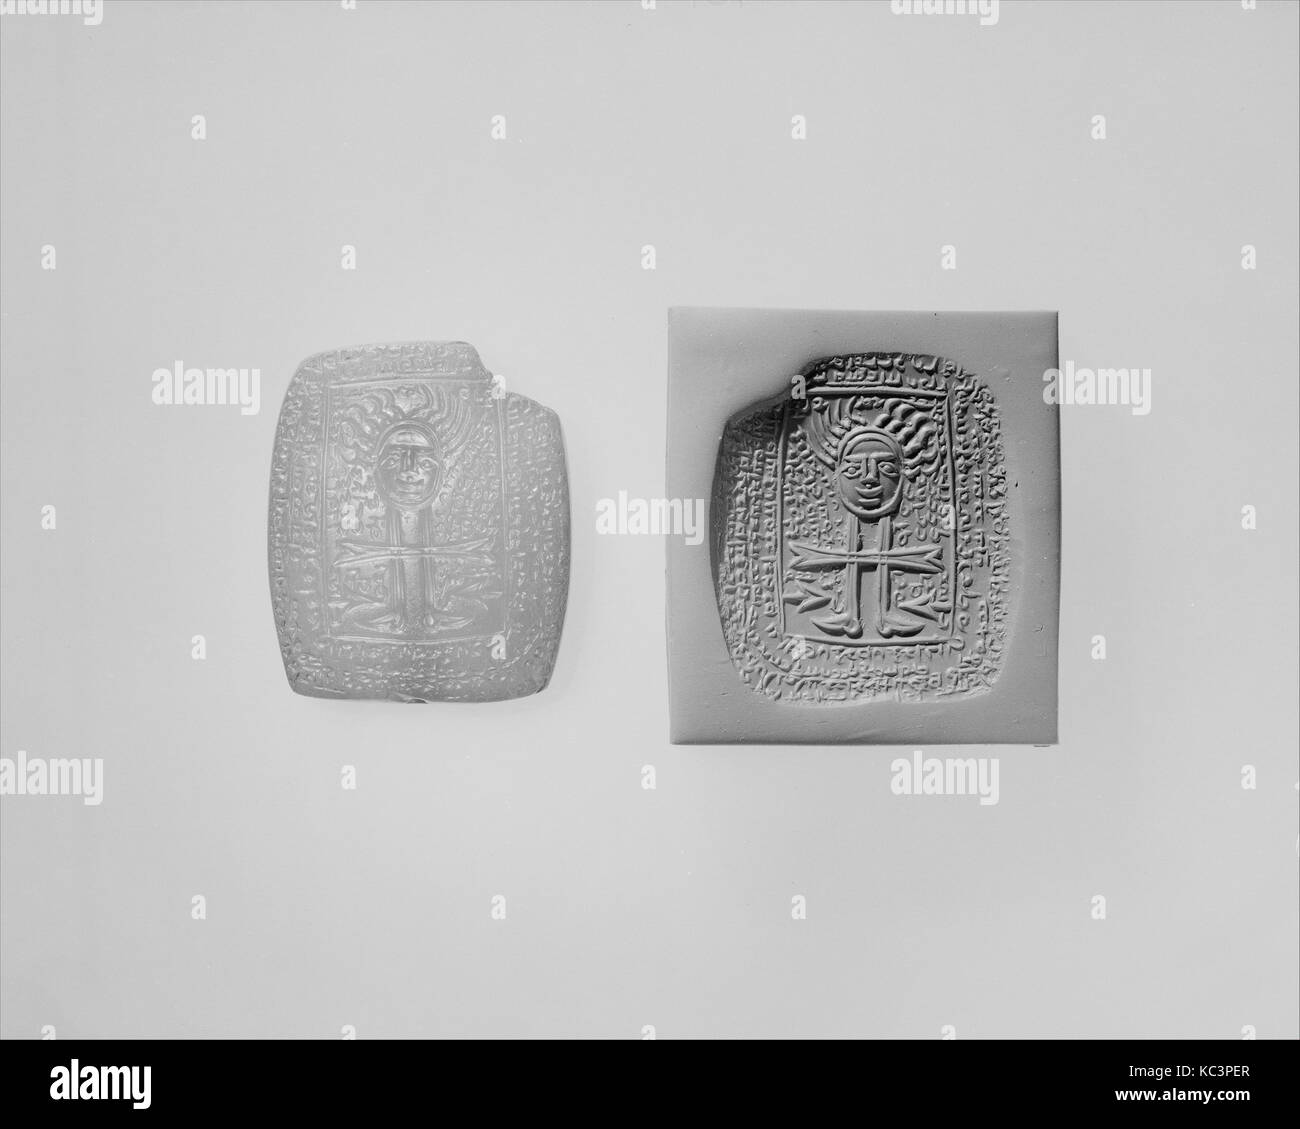 Amulet inscribed in Middle Persian script, ca. 4th century A.D Stock Photo